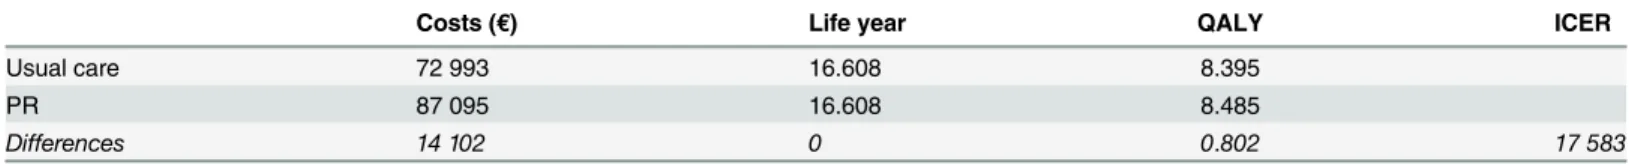 Table 2. Simulation result comparing Respiratory rehabilitation program to usual care (QALY: quality adjusted life year, ICER: incremental cost effectiveness ratio).